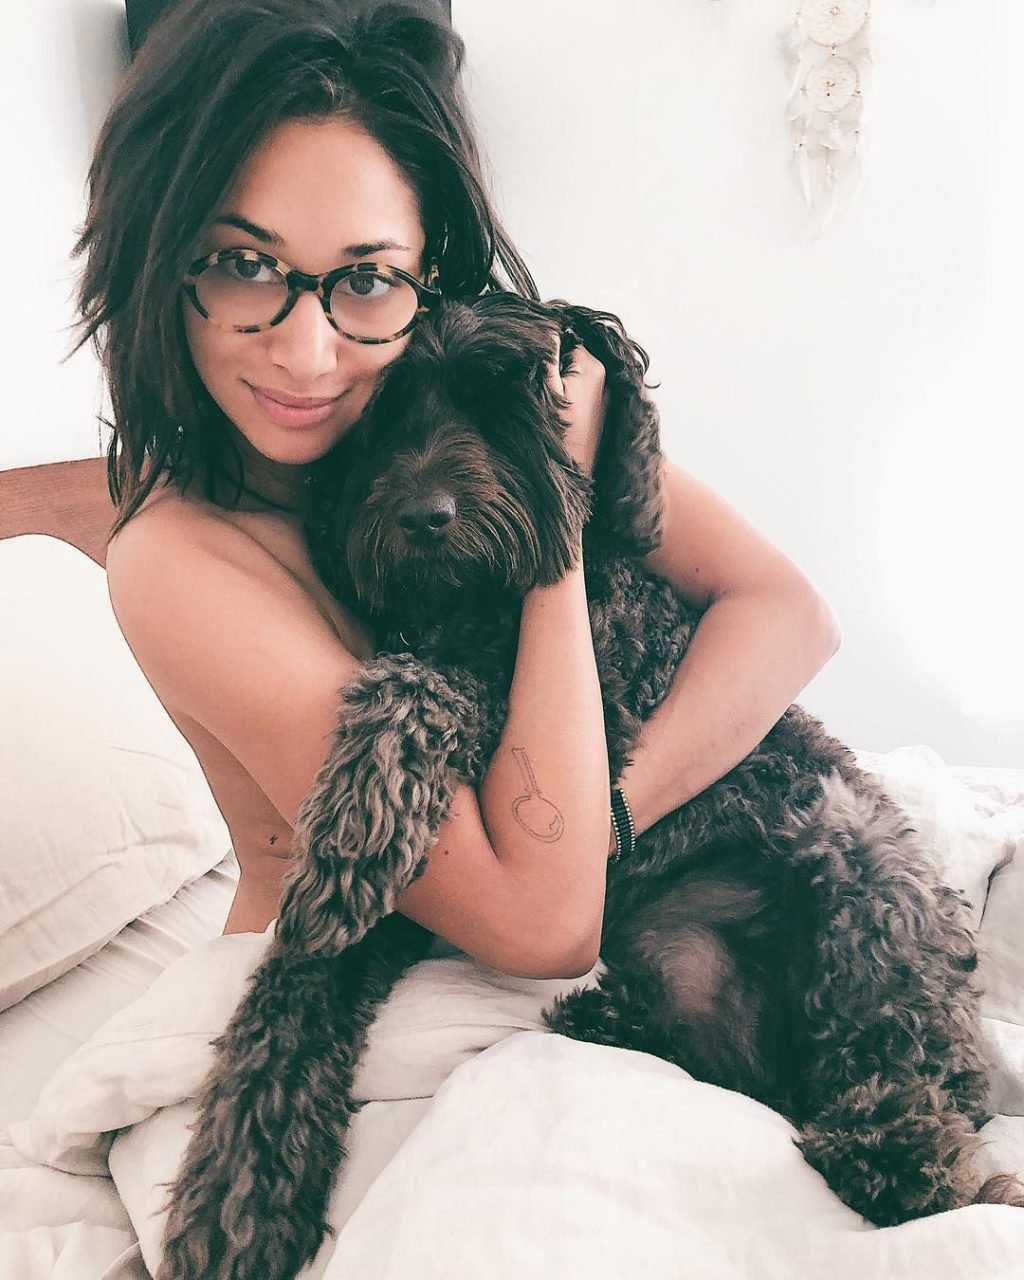 Meaghan Rath Nude &amp; Sexy (86 Photos + GIFs &amp; Videos)